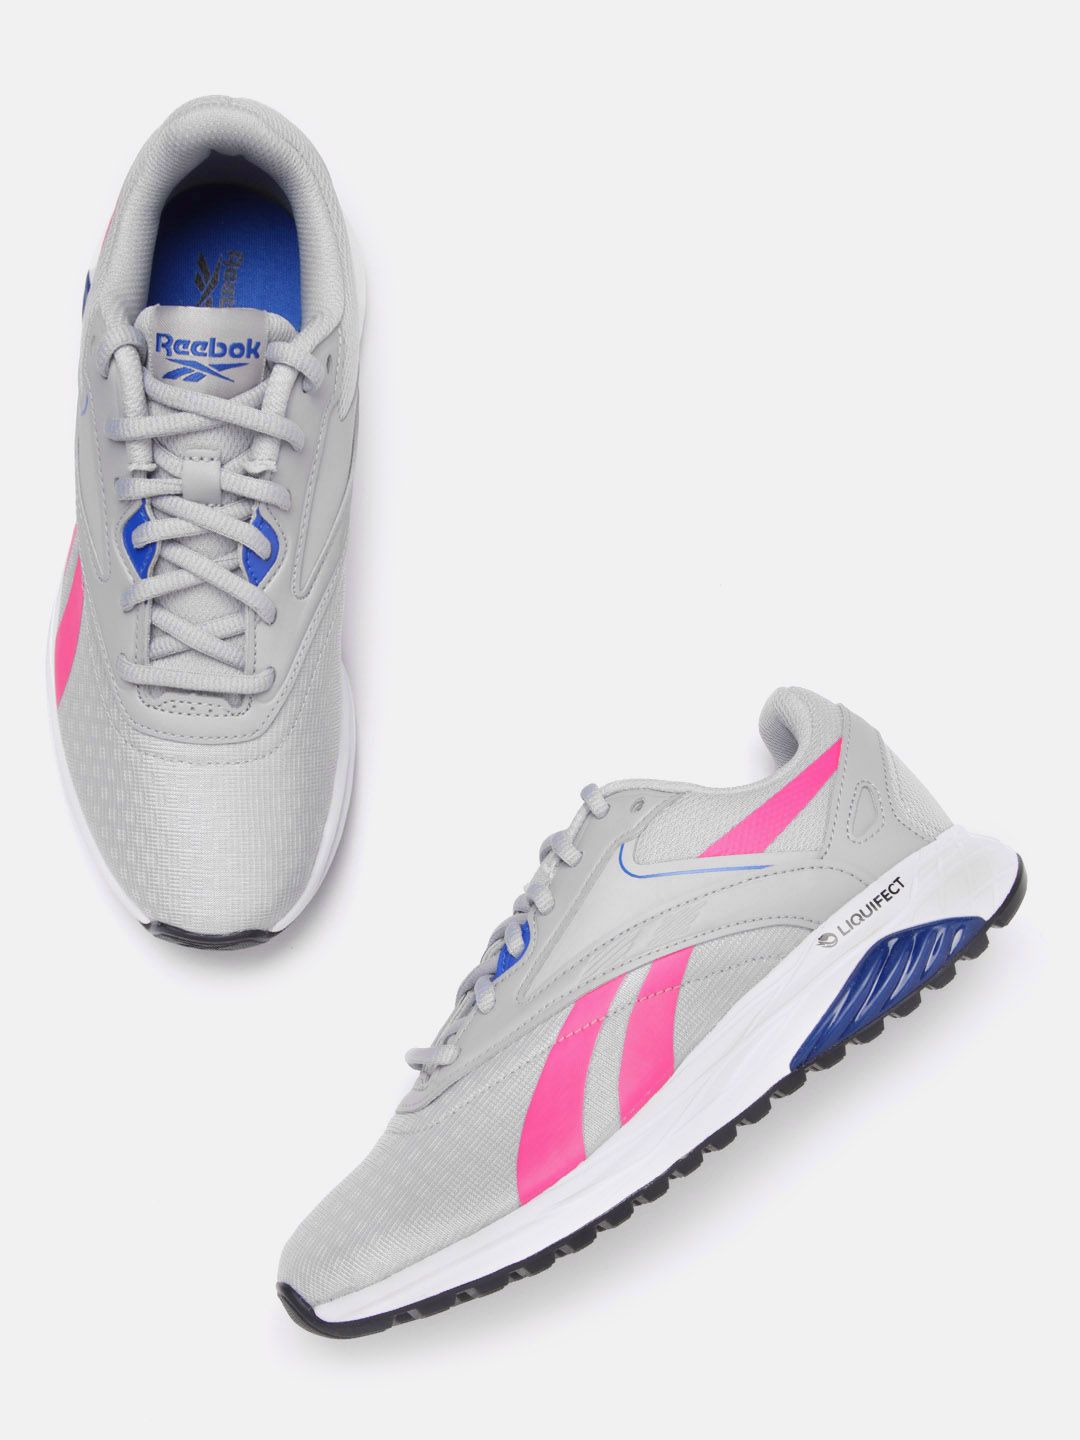 Reebok Women Grey & Pink Woven Design Liquifect 90 2 Running Shoes Price in India